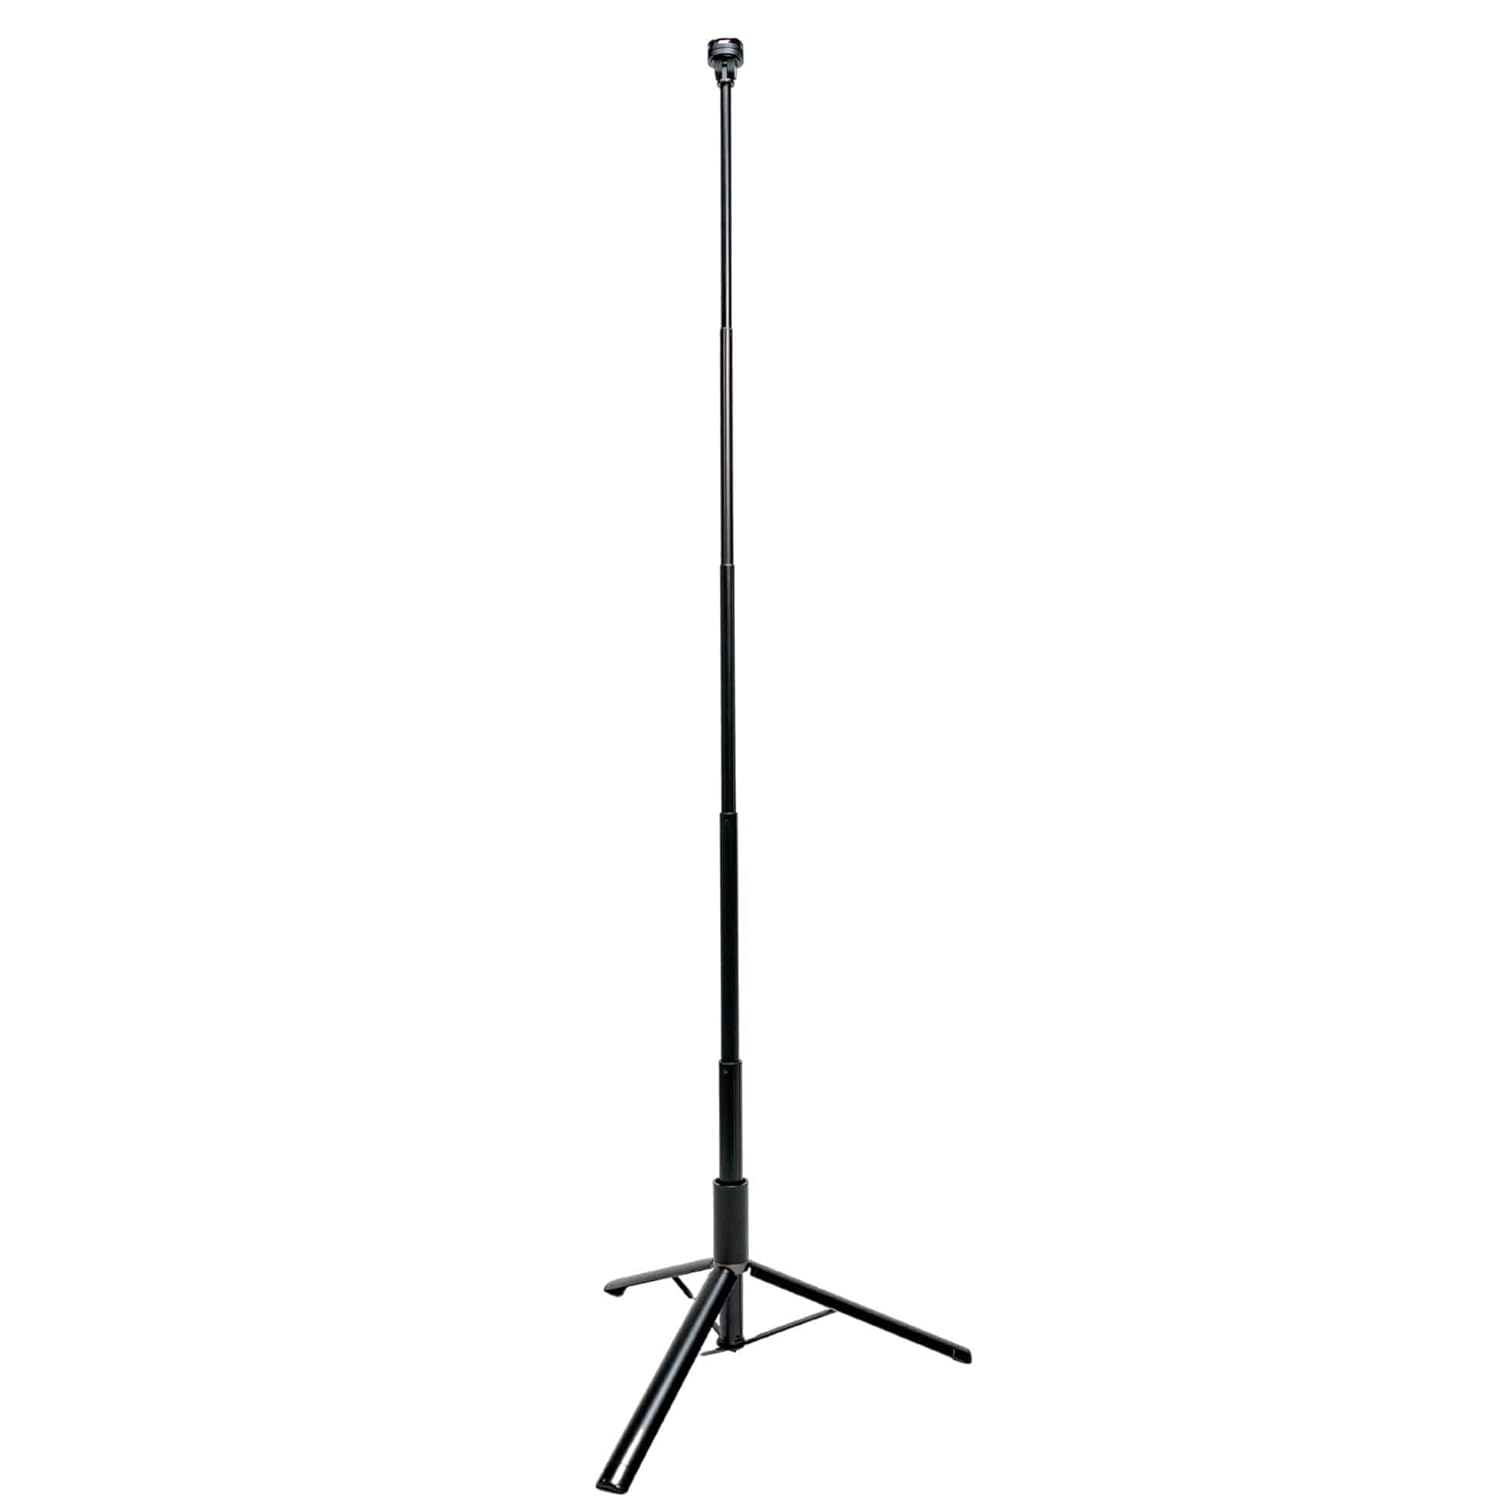 Zell Electronics Zell Adjustable 5Ft Light Stand Tripod | Height 2Ft To 5Ft | Stand For Lights, Webcams, Cameras, Adjustable Height, 360º Rota…